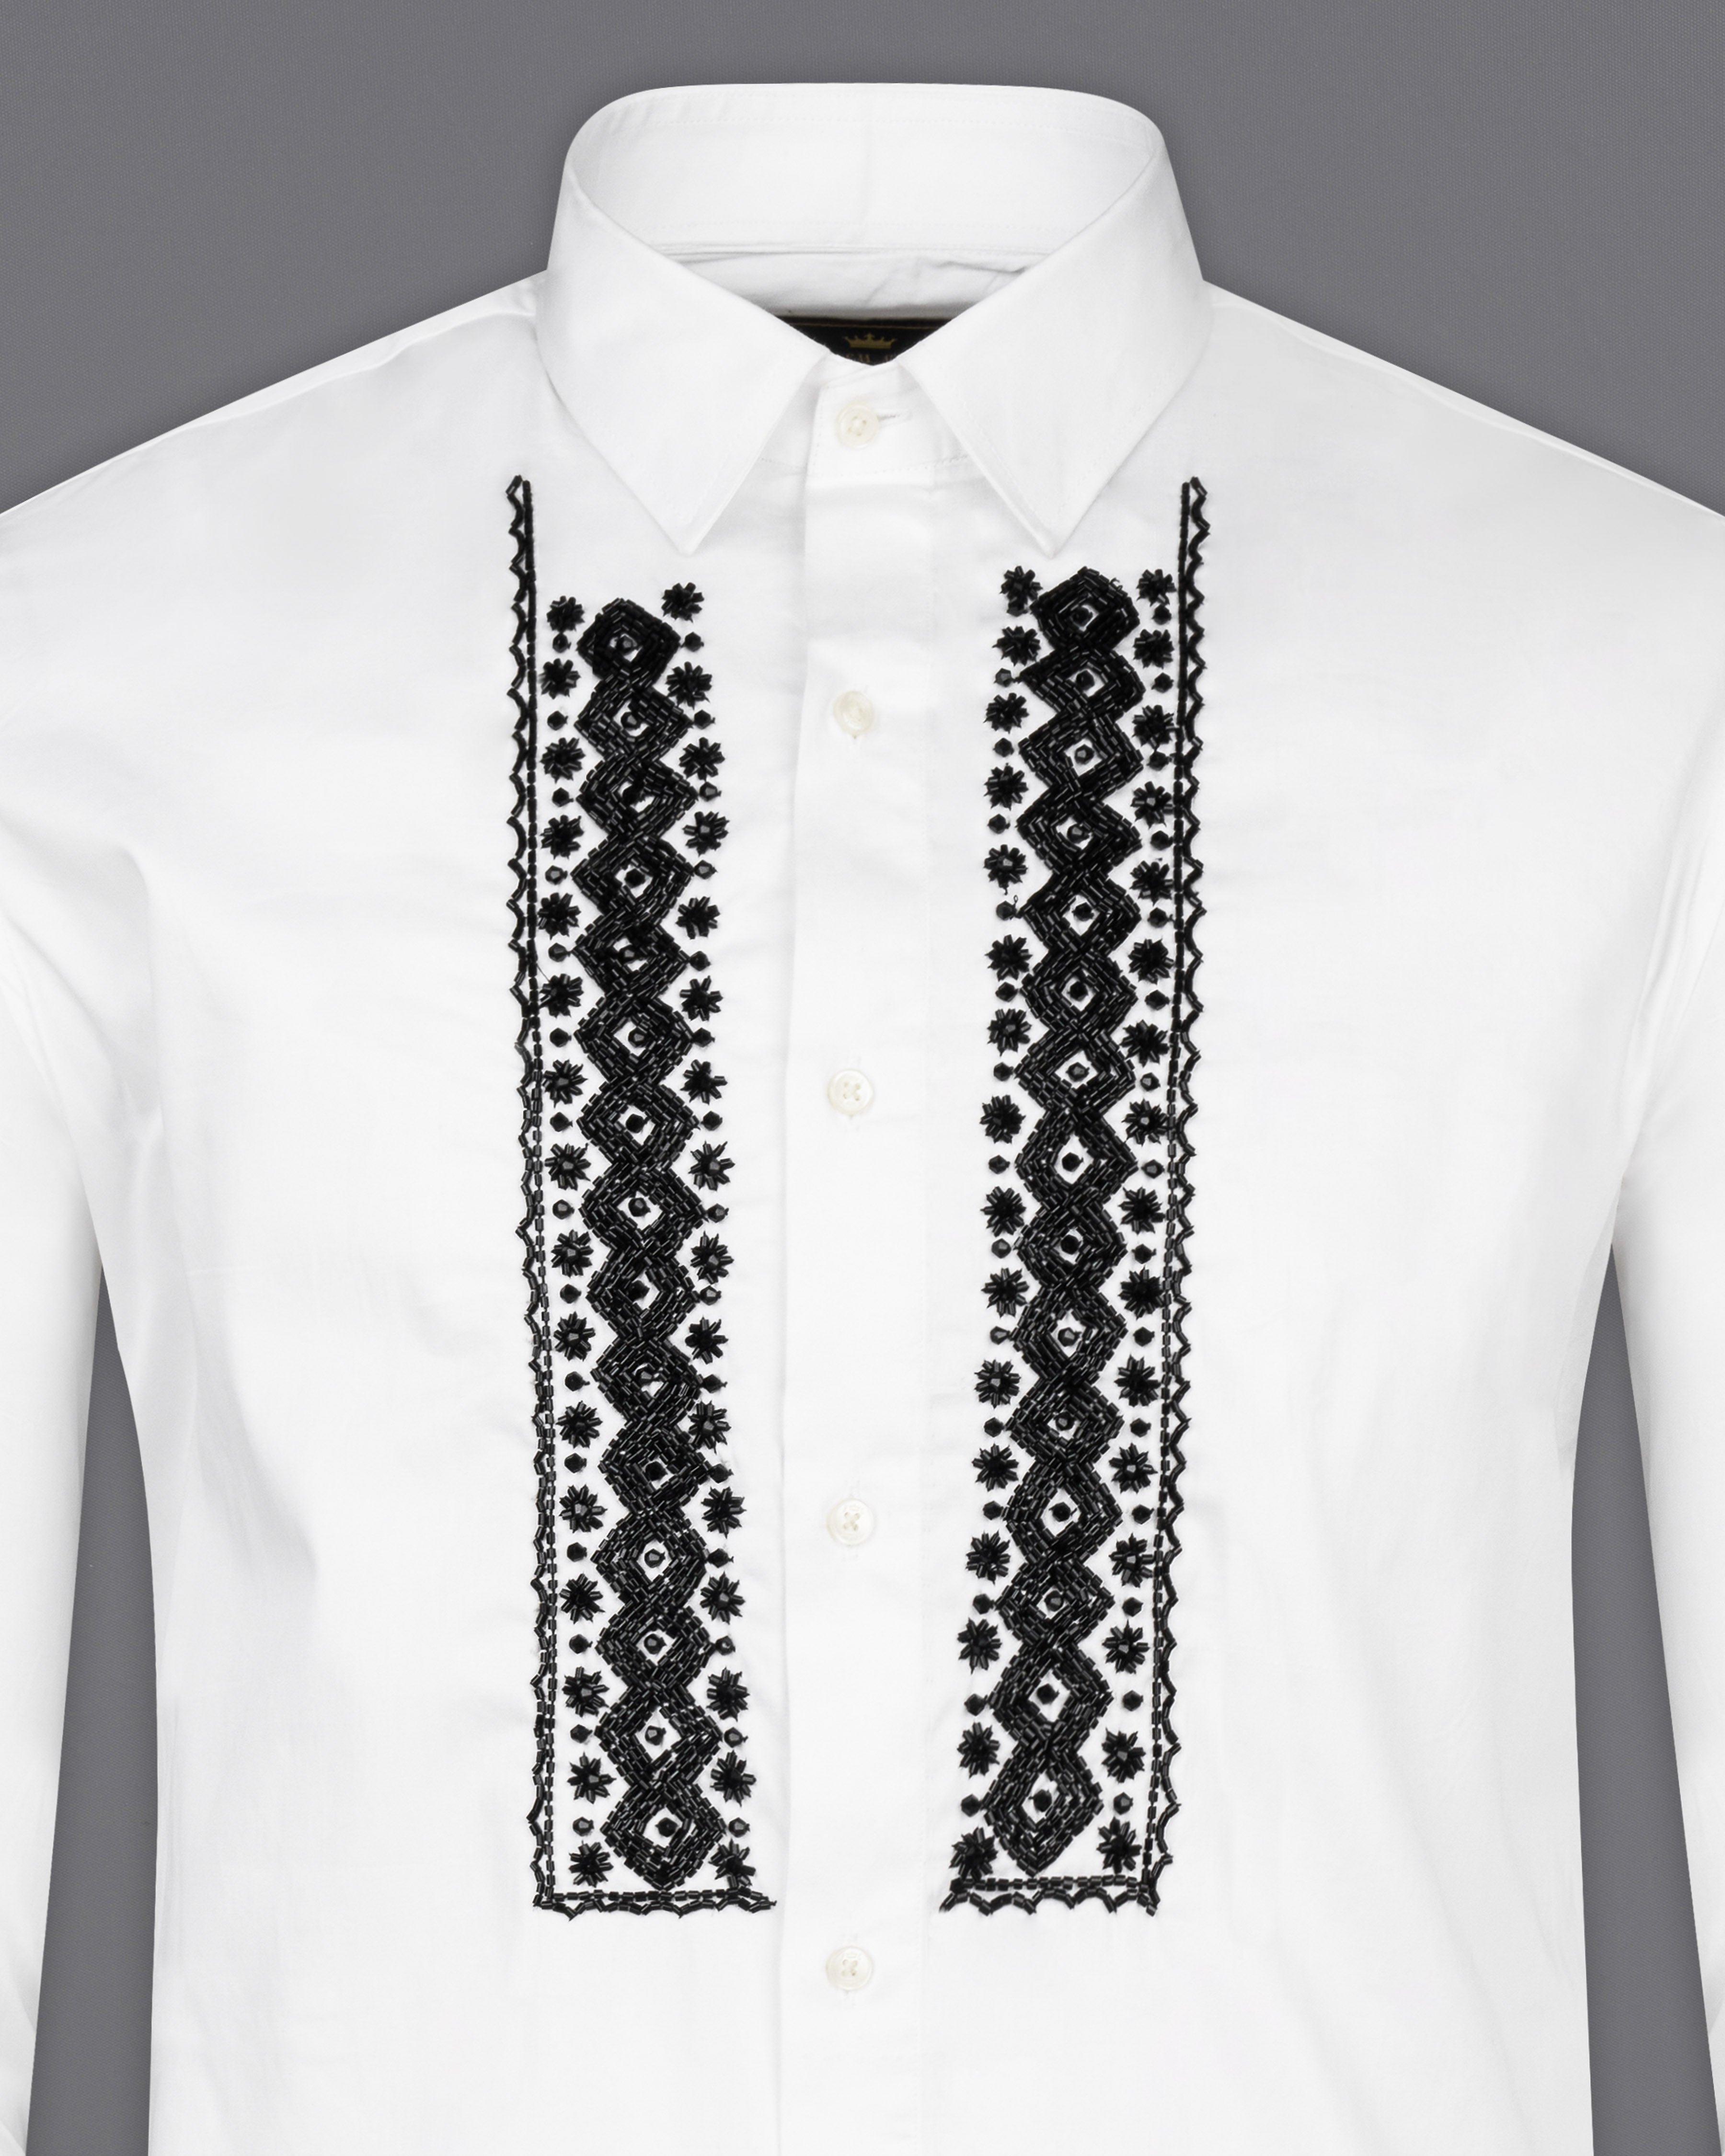 Evening Embroidered Shirt - Luxury White